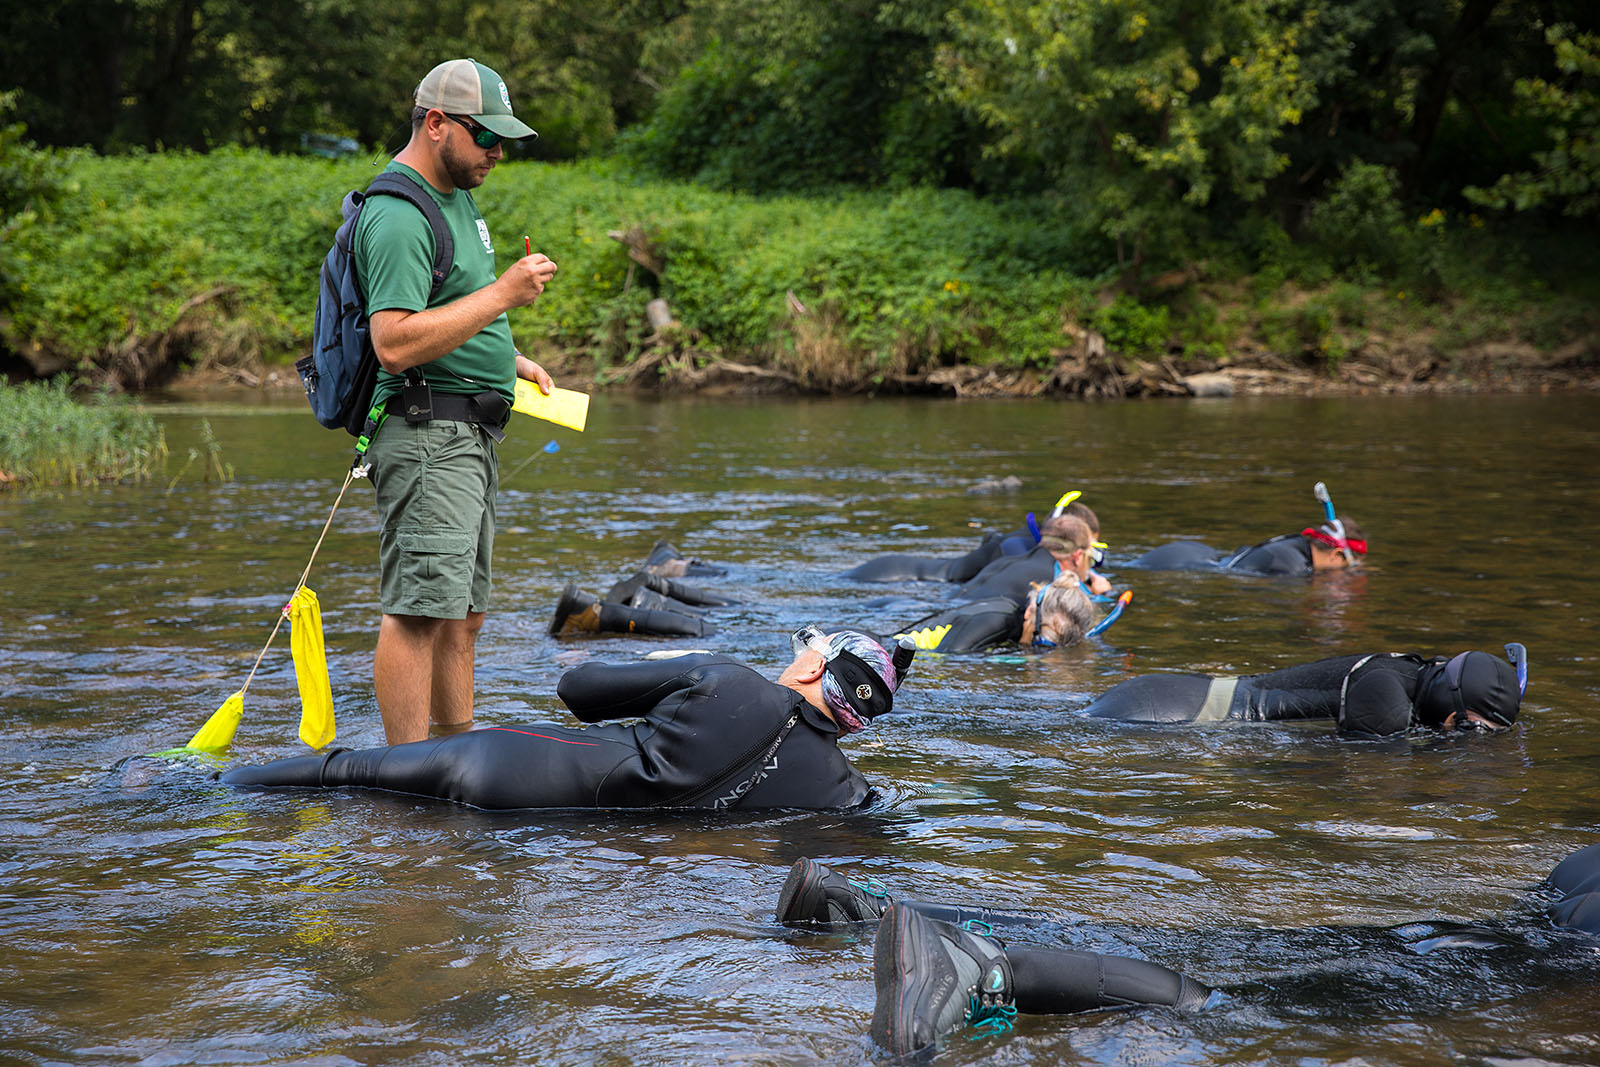 A group of people dressed in wet suits with snorkels on lie face-down in a shallow river while another person stands over them, recording data on a clipboard.